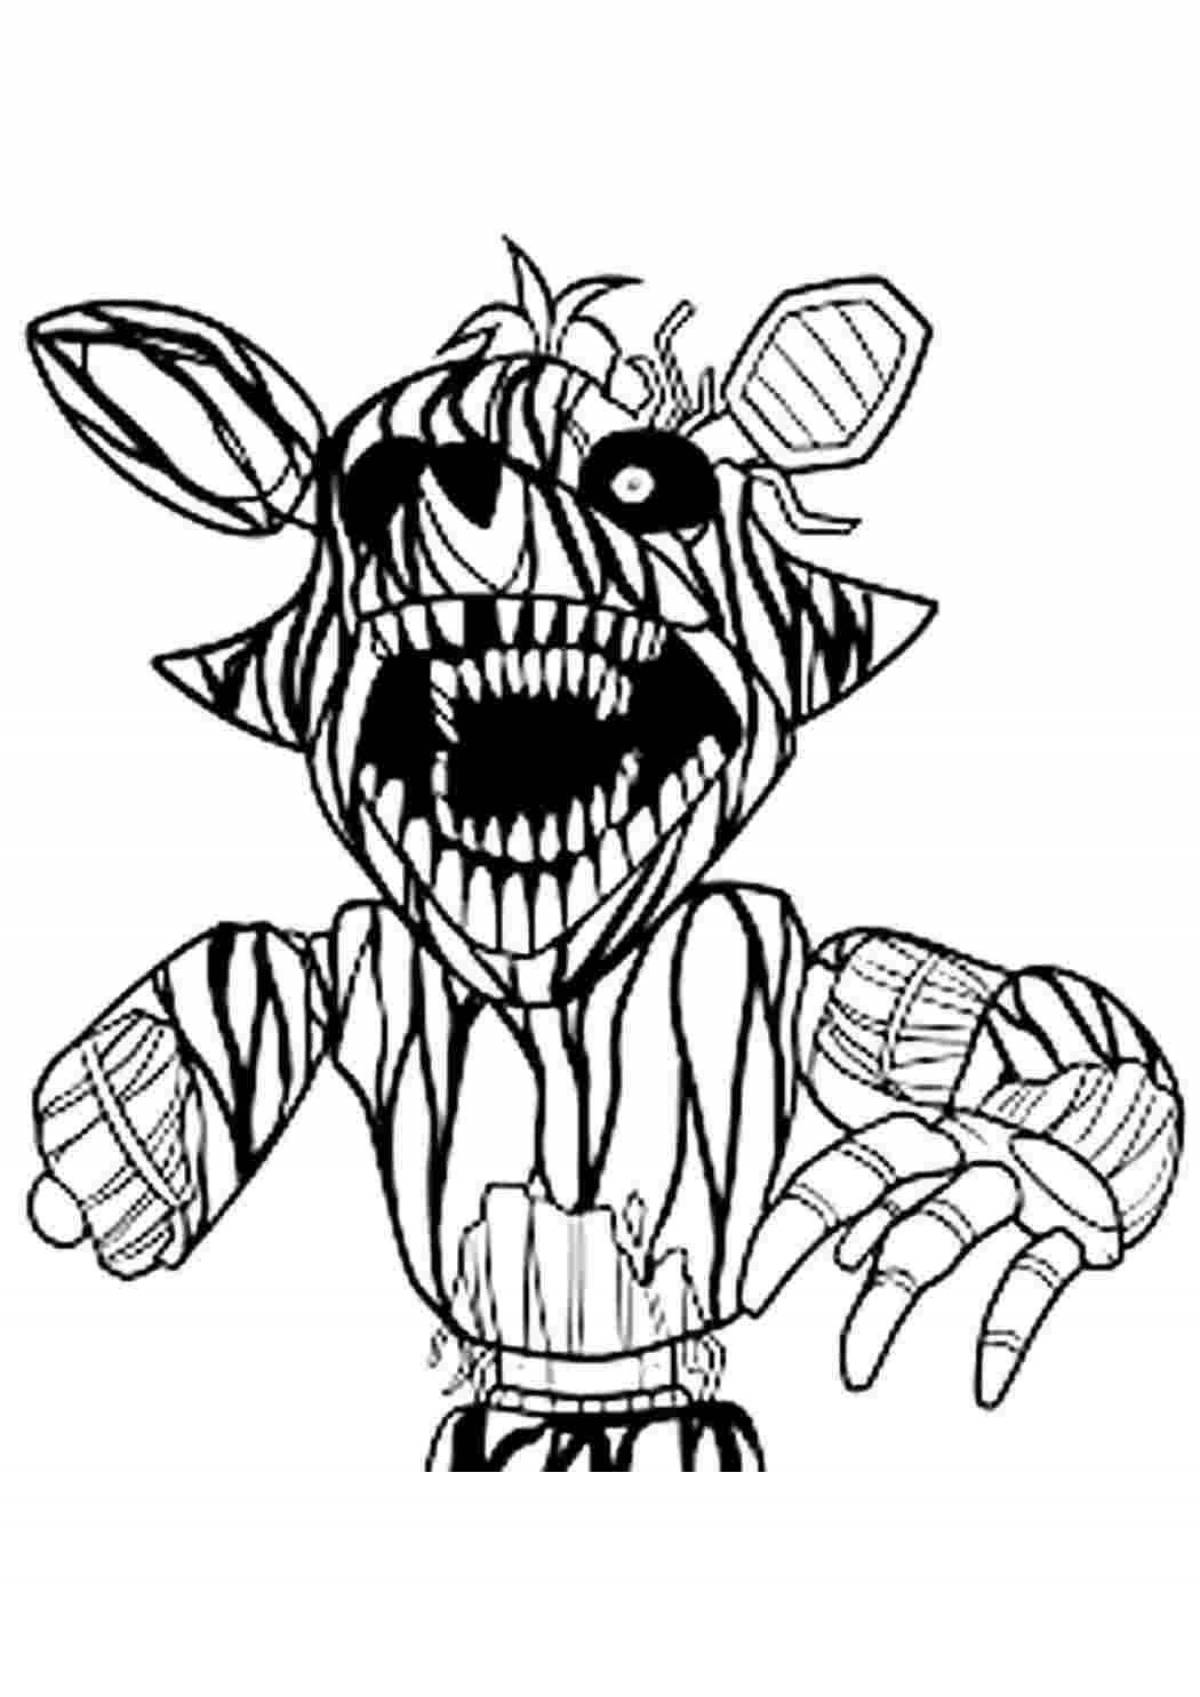 Charming fnaf foxy coloring book